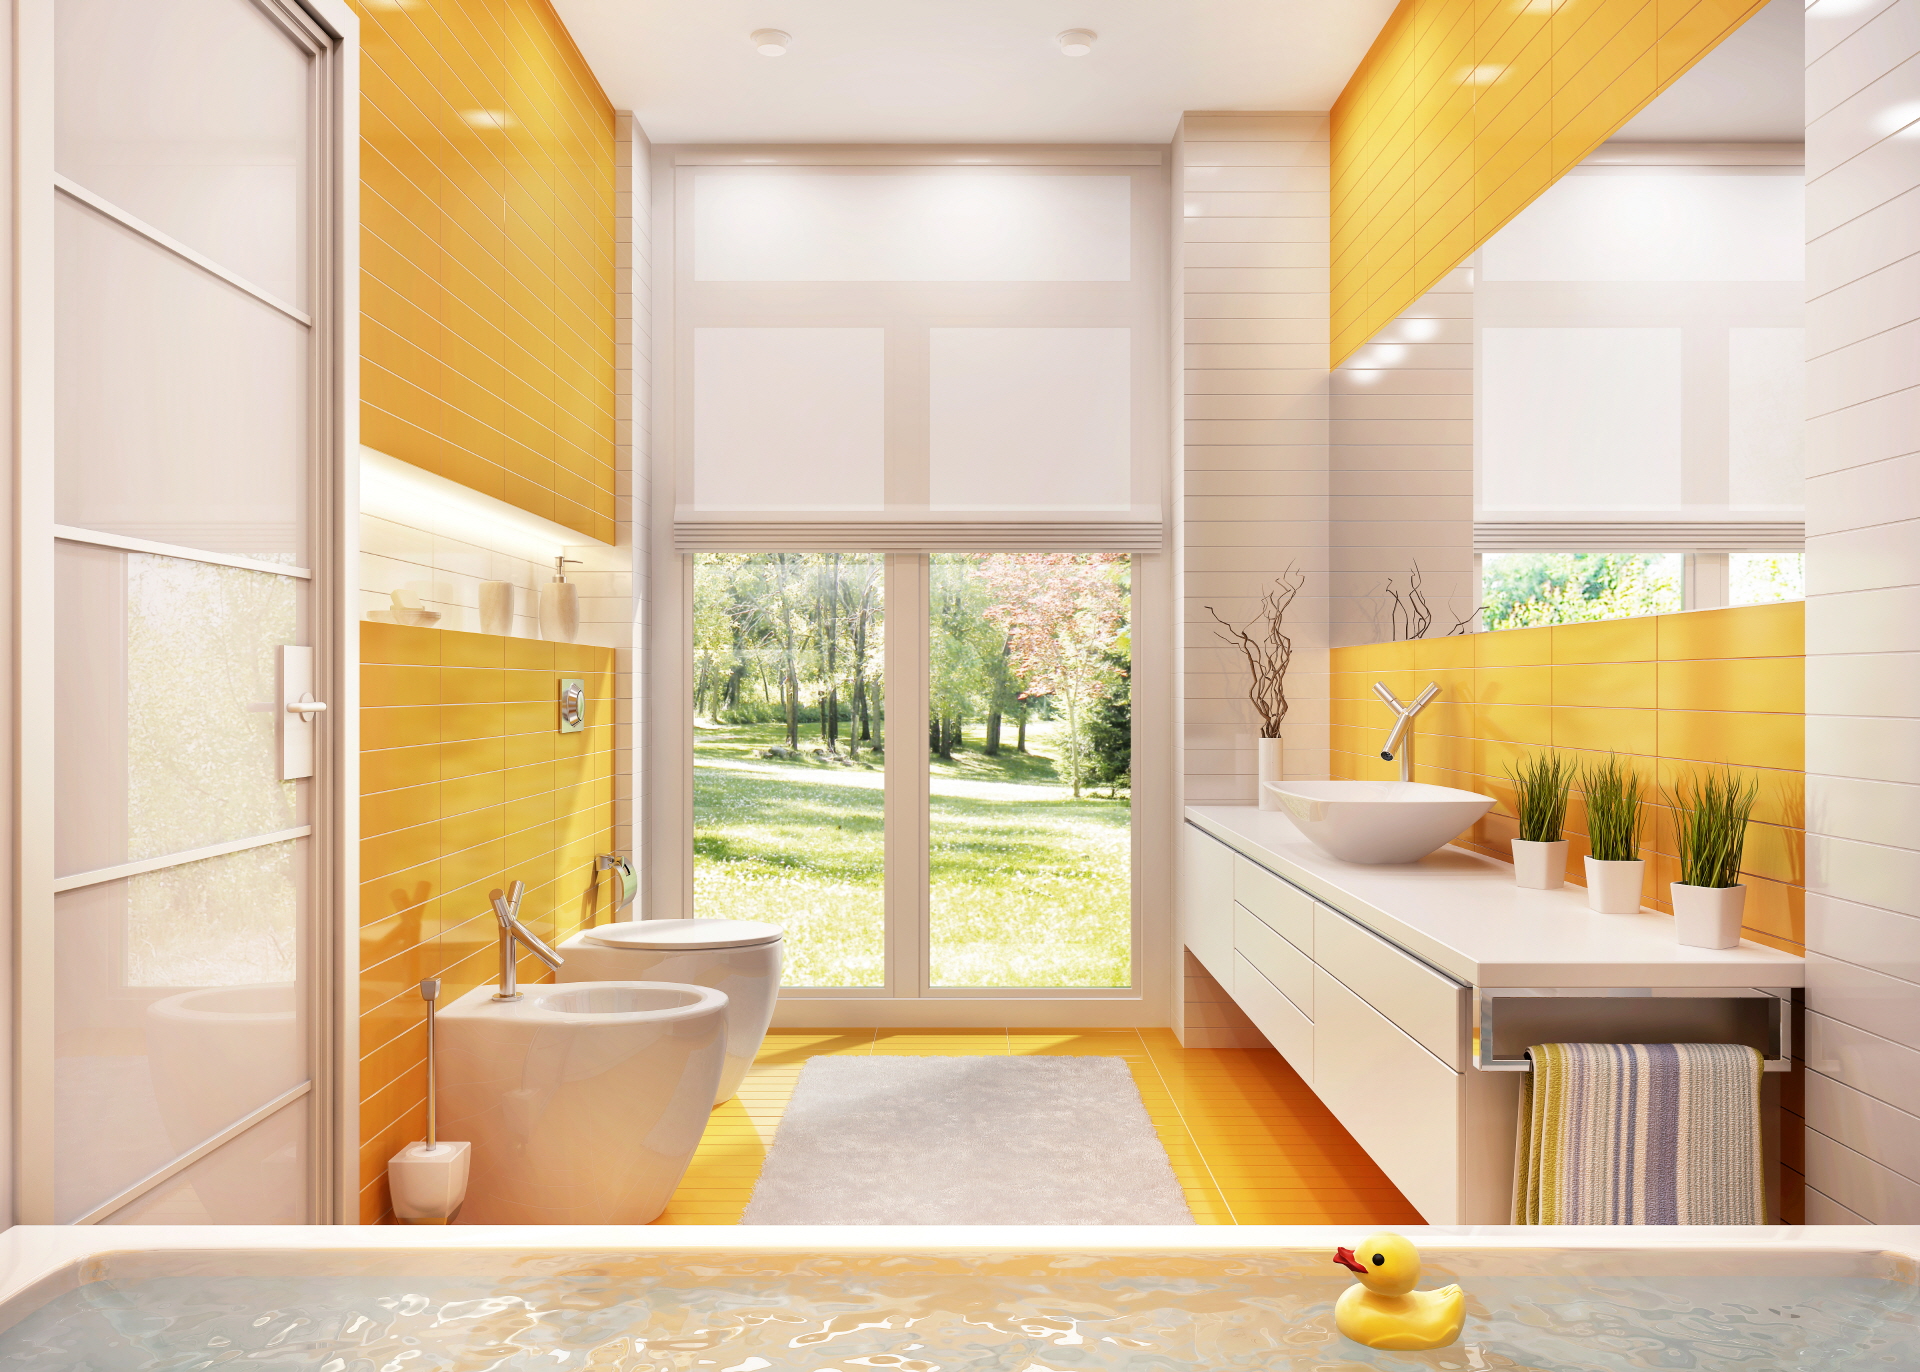 Light yellow brings warmth and cheer to small bathrooms, pairing well with white and gray for a fresh, inviting ambiance.